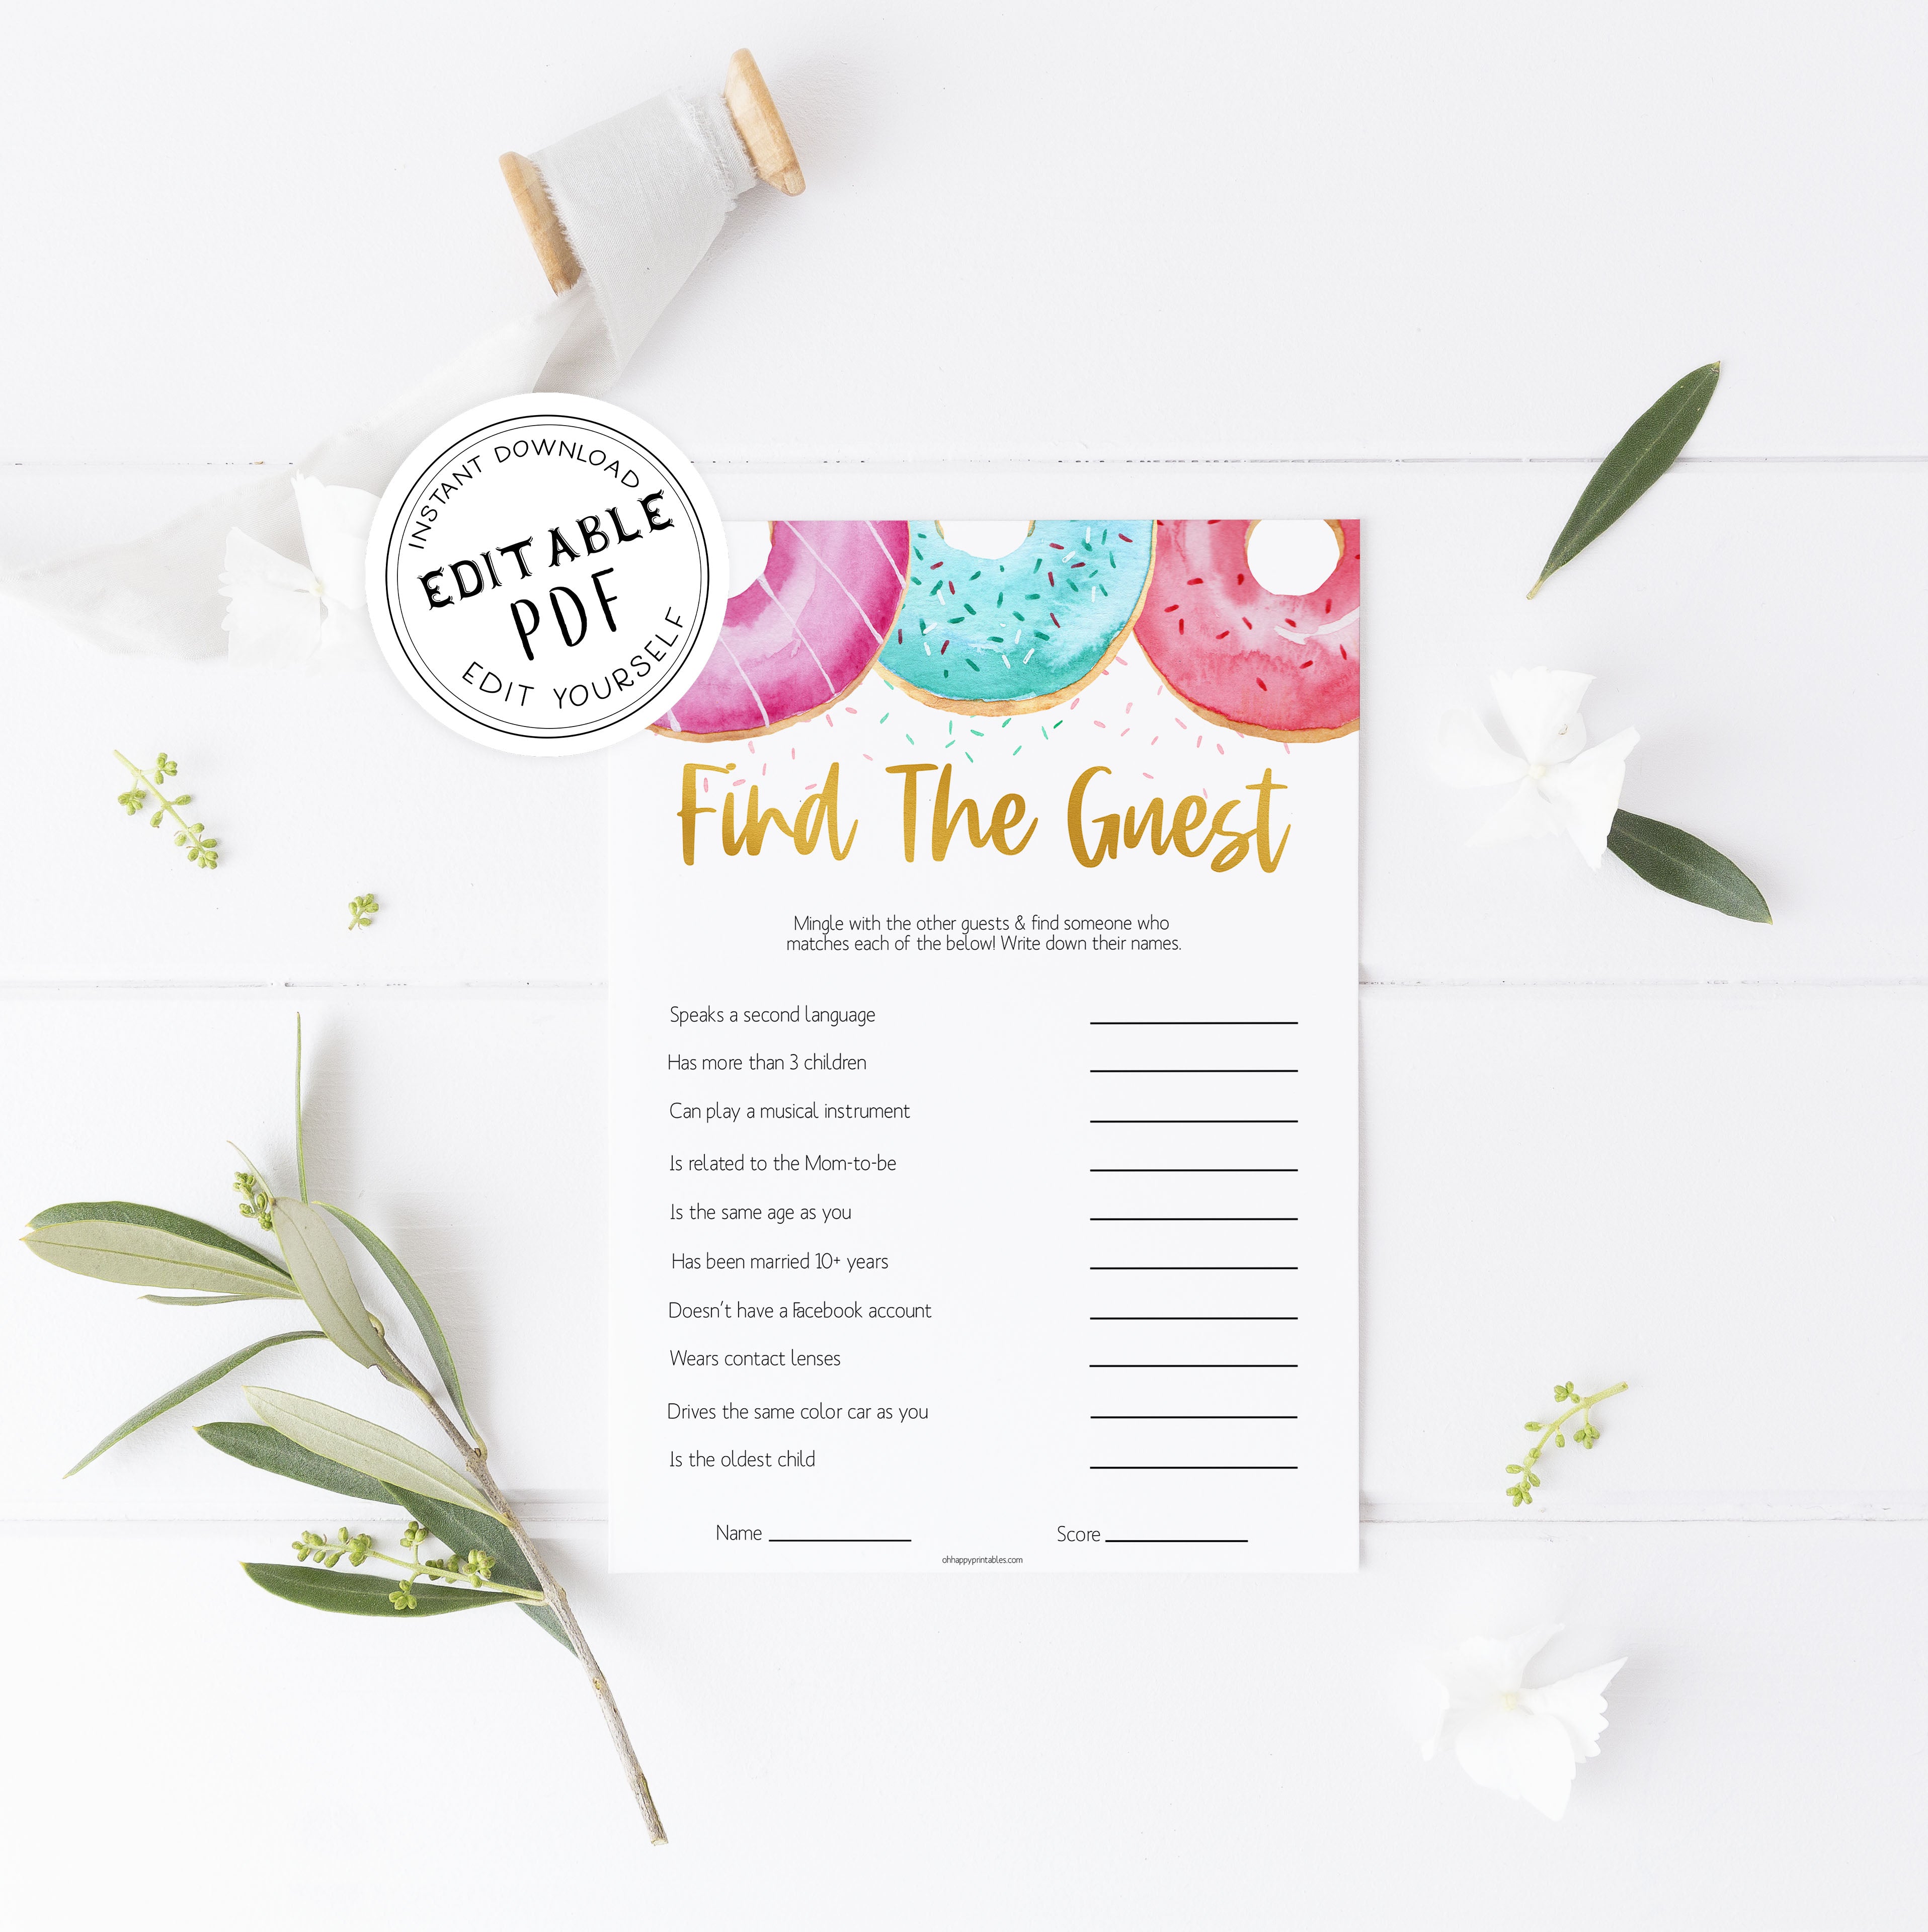 editable baby games, find the guest baby shower game, Printable baby shower games, donut baby games, baby shower games, fun baby shower ideas, top baby shower ideas, donut sprinkles baby shower, baby shower games, fun donut baby shower ideas